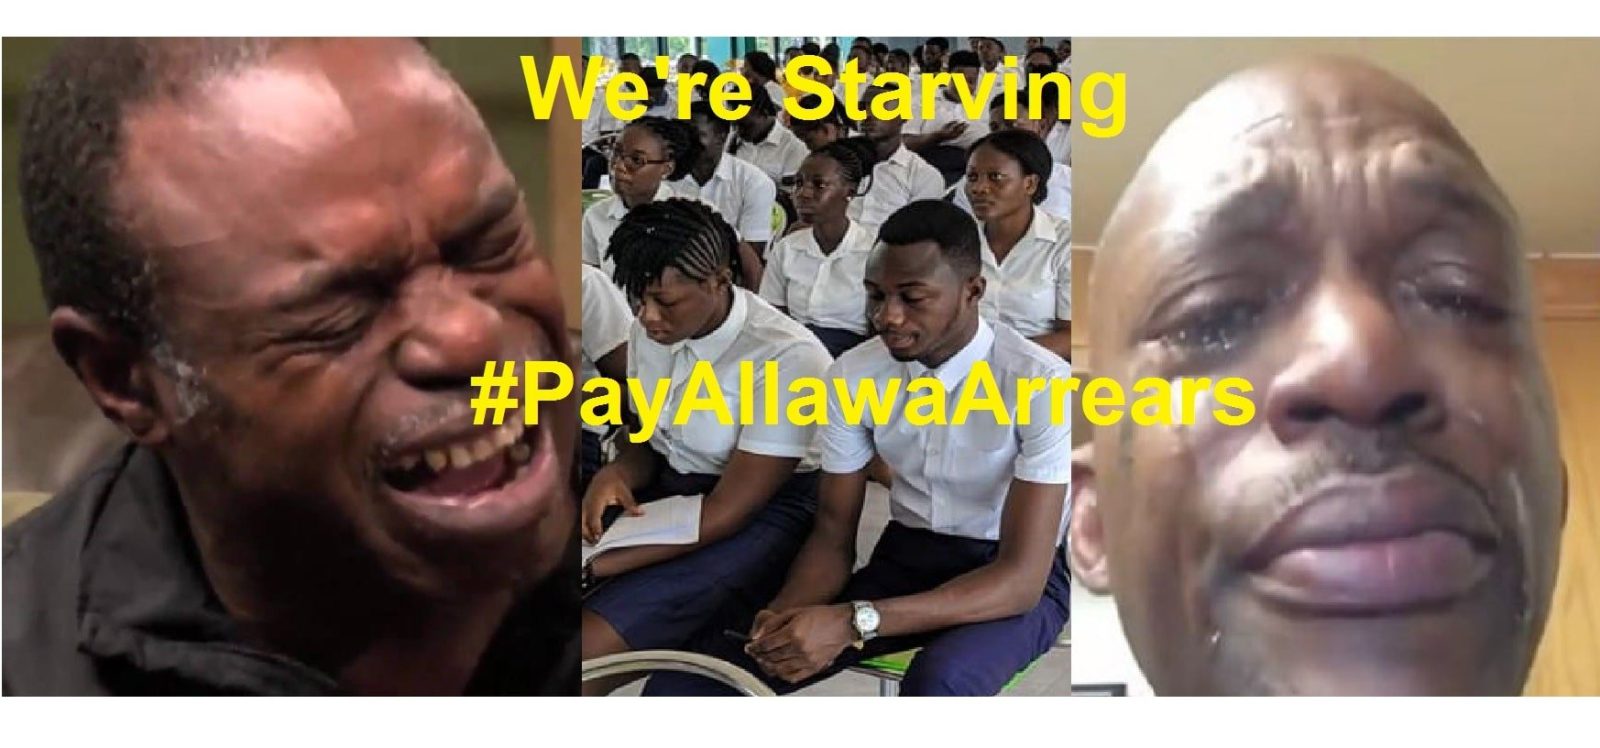 6 Months No Allowance We're Starving #PayAllawaArrears -Trainees Cry